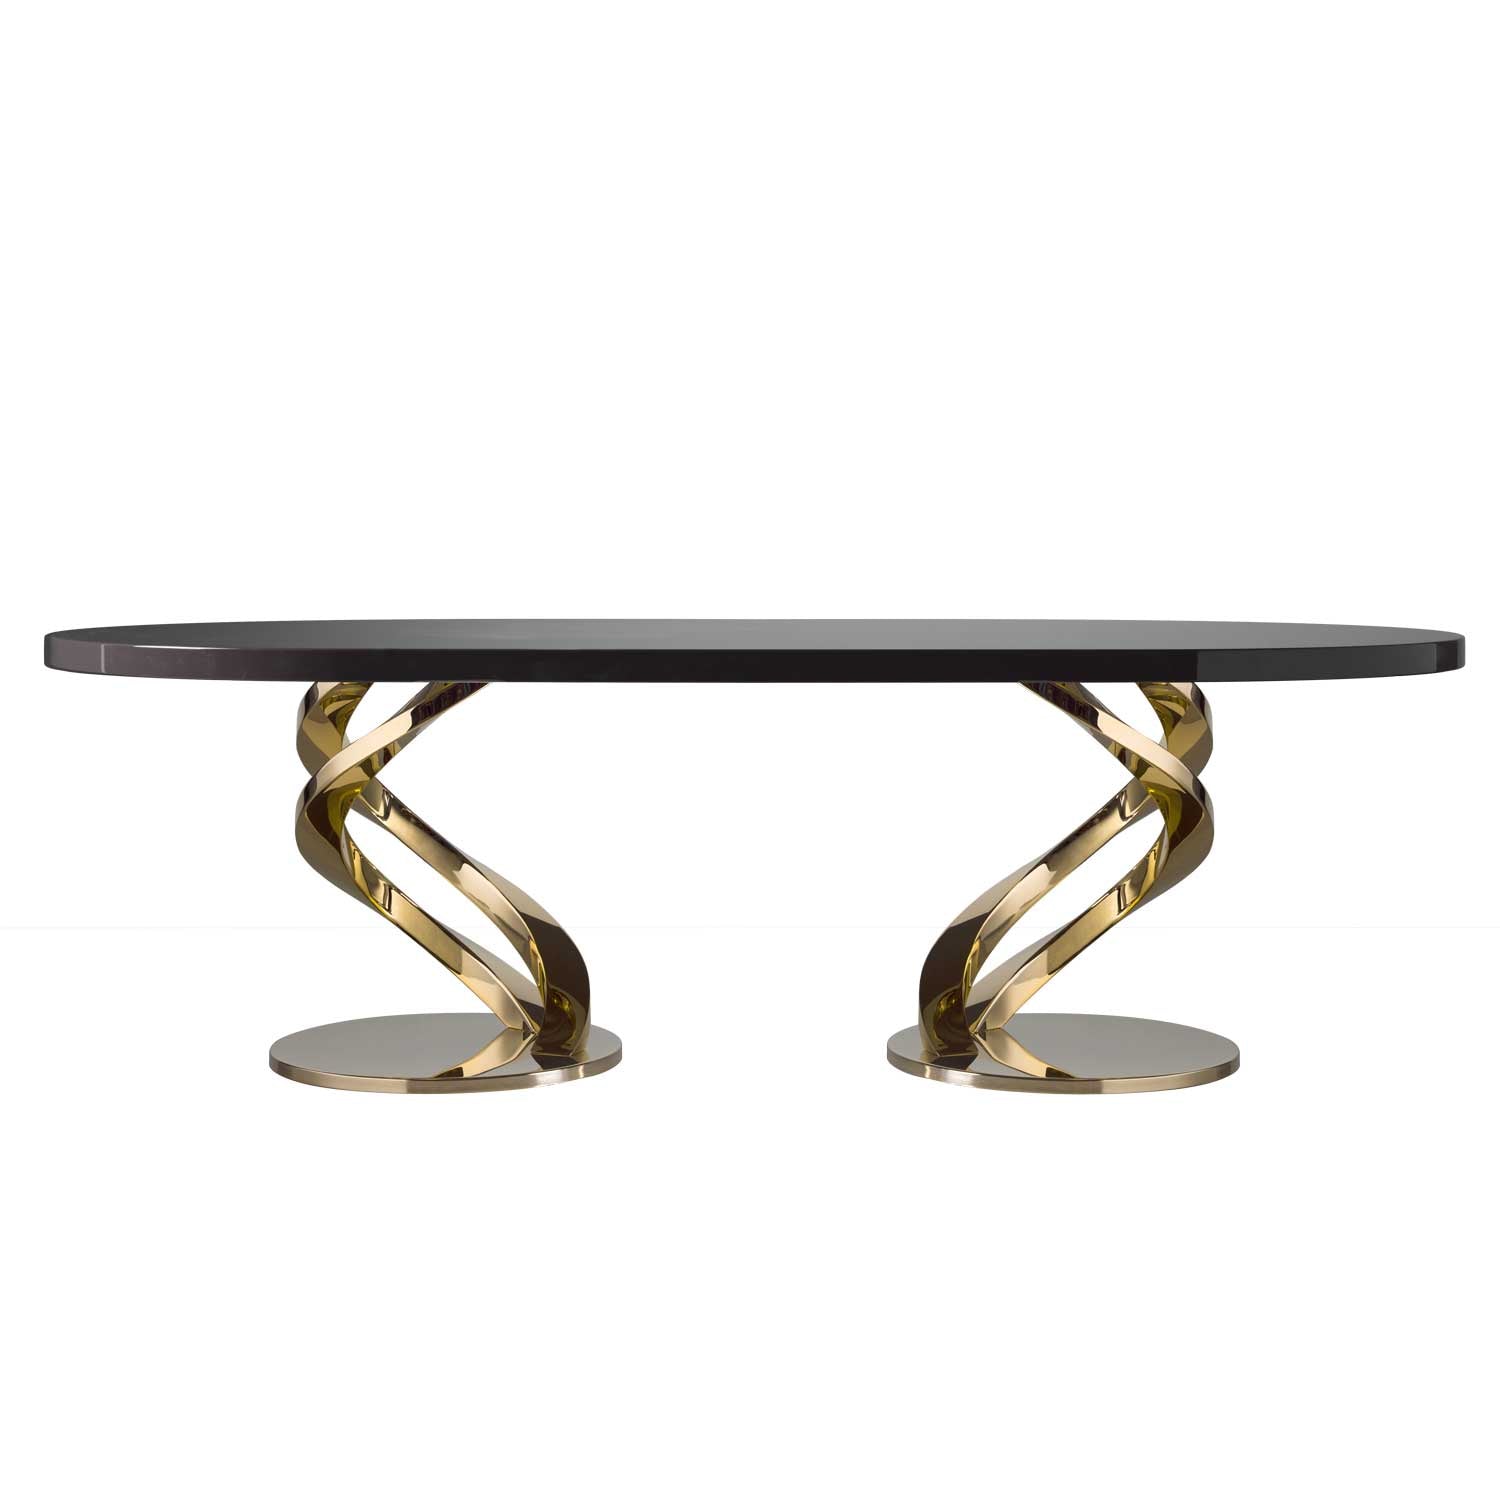 Eclypse Large Oval Dining Table - Black & Gold